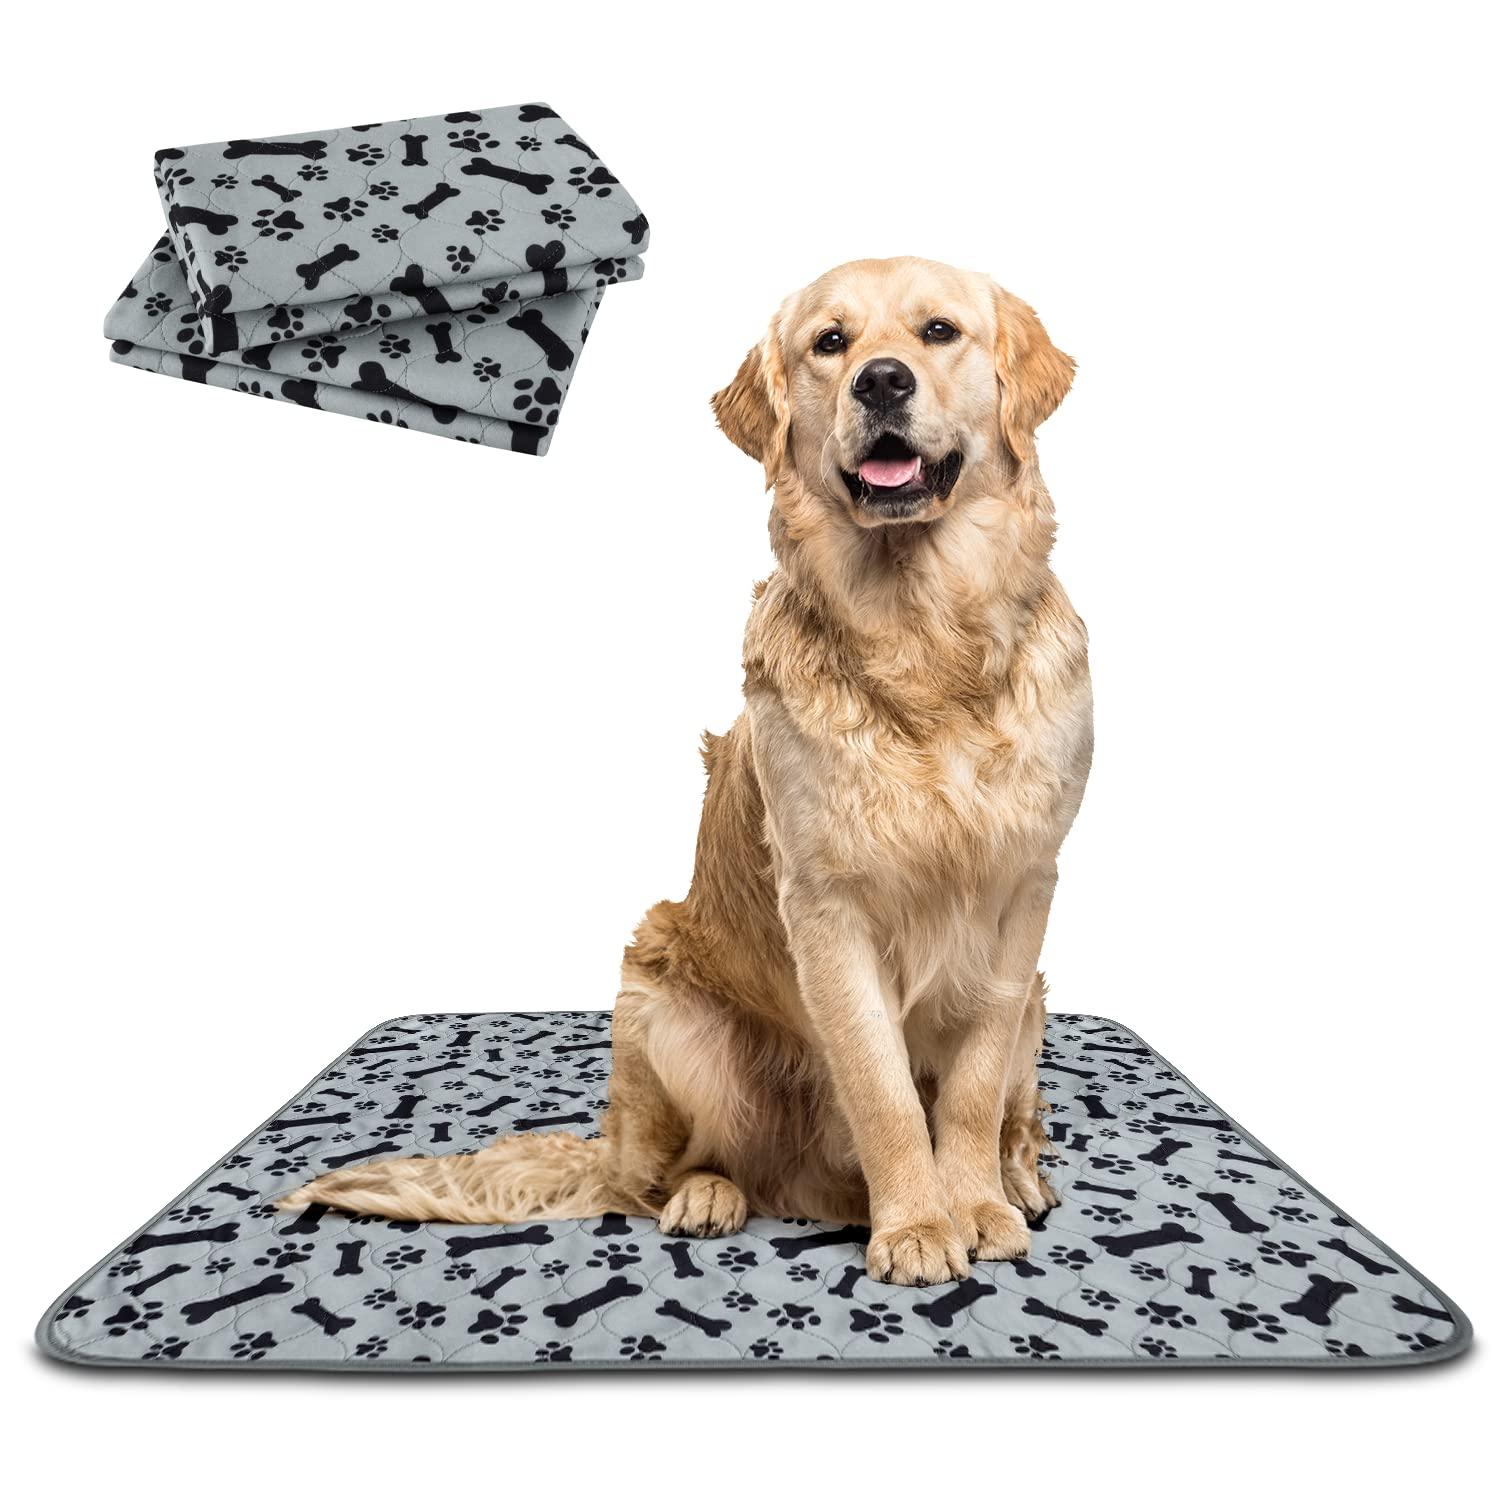 The Proper Pet Washable Pee Pads for Dogs, Reusable Puppy Pads - Easy to Clean, Waterproof Dog Mat, Puppy Mat - Reusable Dog Pee Pads - Washable Potty Pads for Dogs - Reusable Pee Pads for Dogs